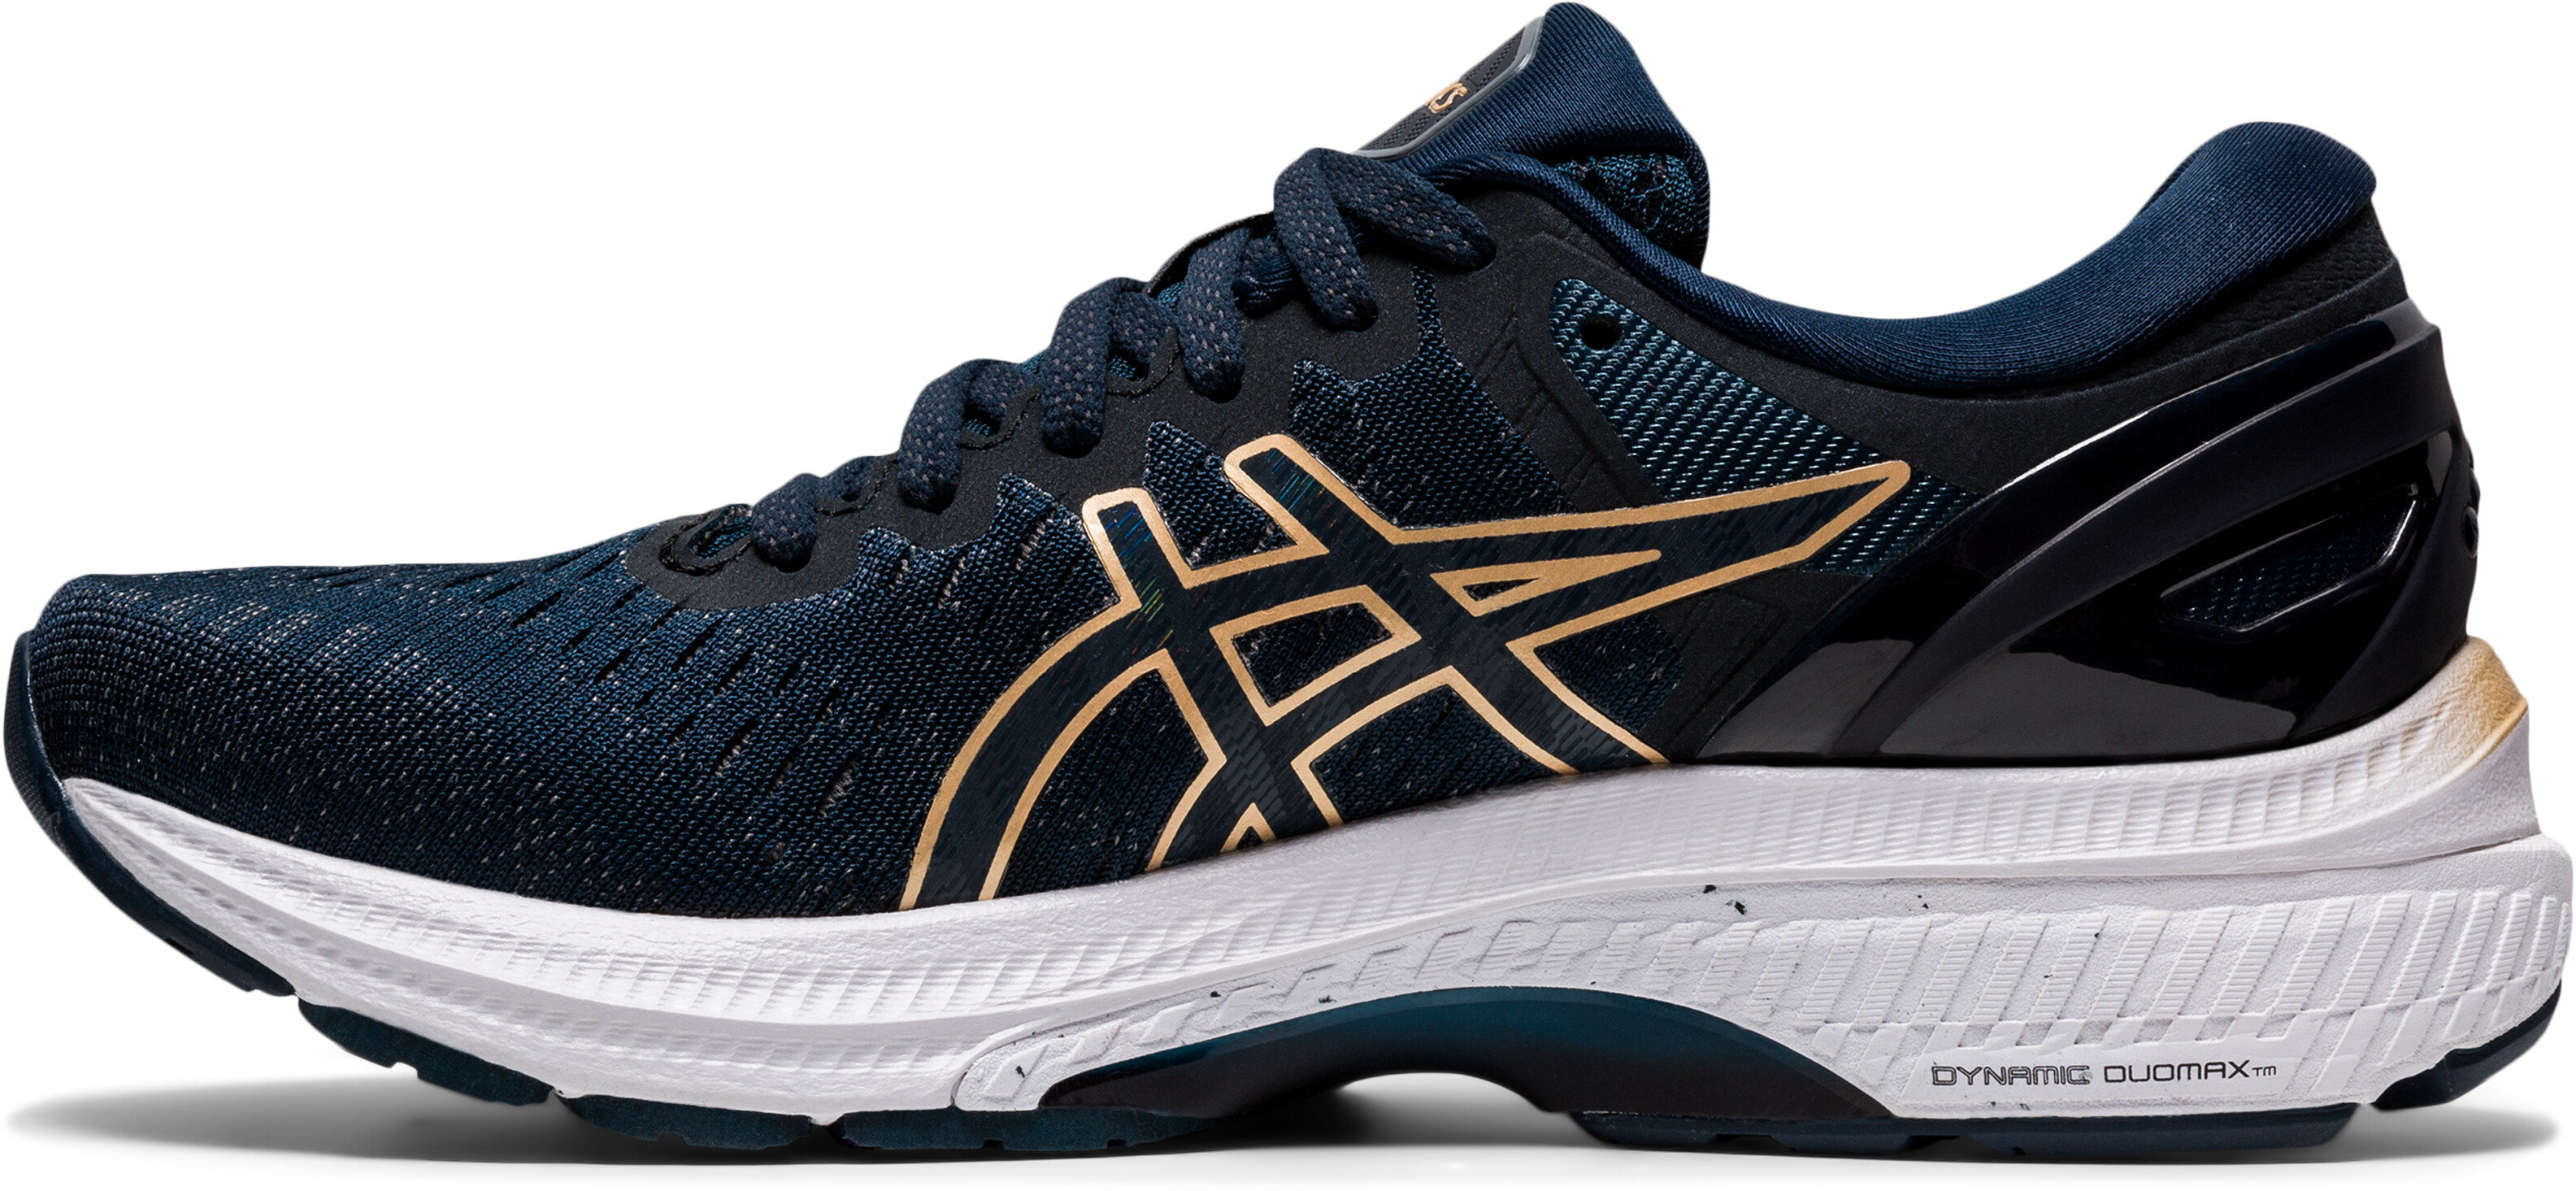 asics Gel-Kayano 27 Shoes Women french blue/champagne at bikester.co.uk